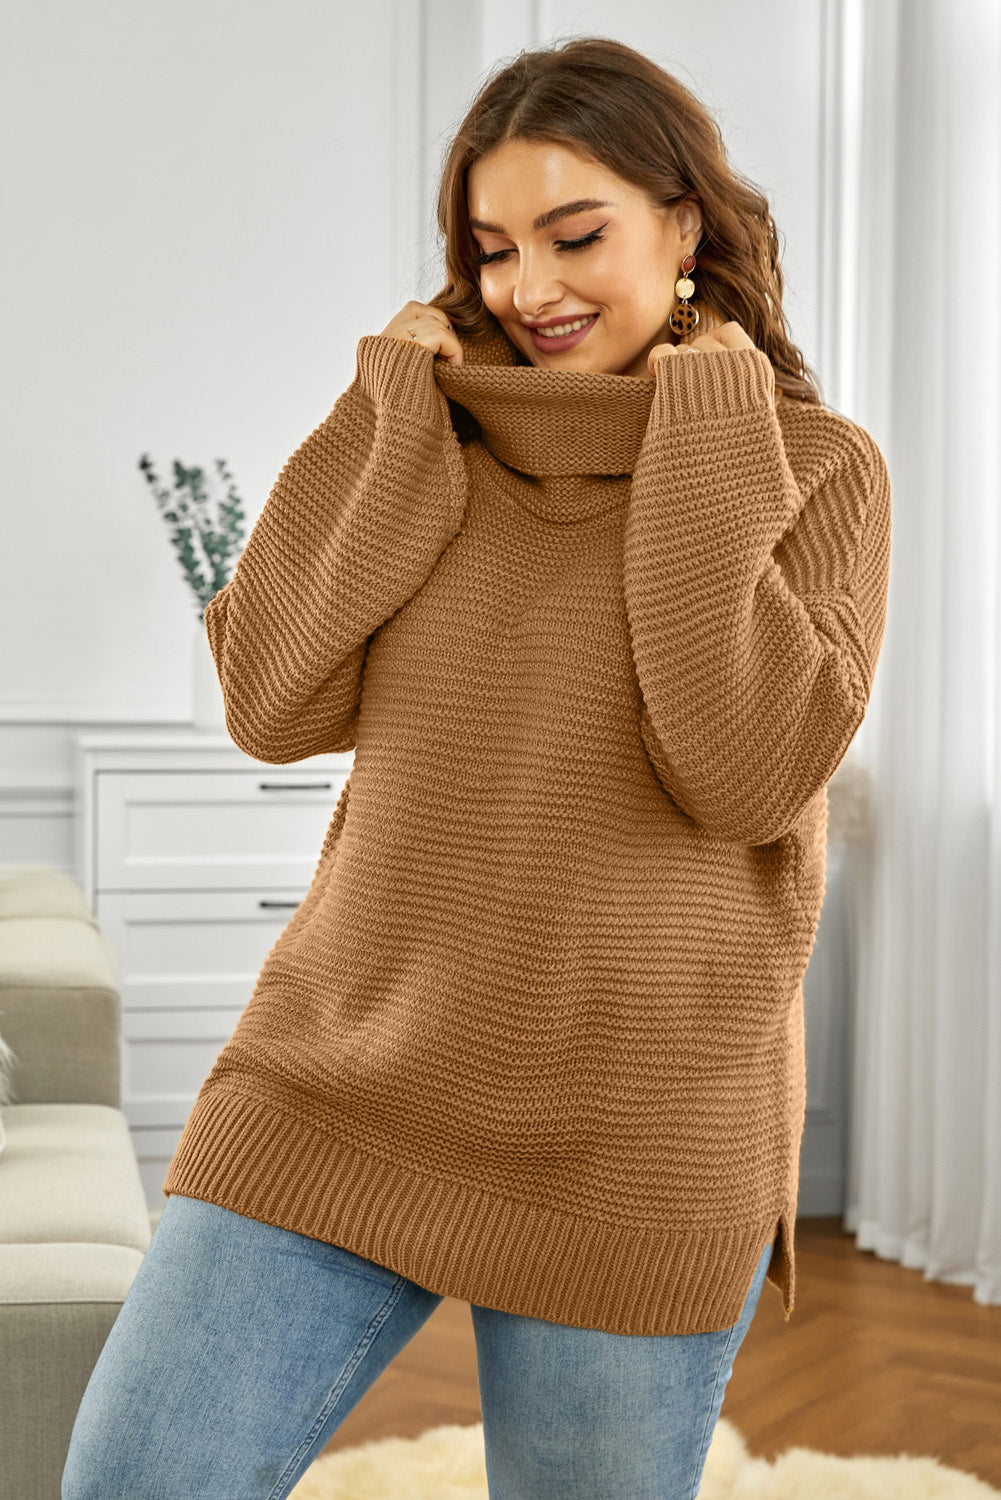 Drop and Roll Oversized Turtleneck Sweater in Green, Grey, Khaki, or Navy